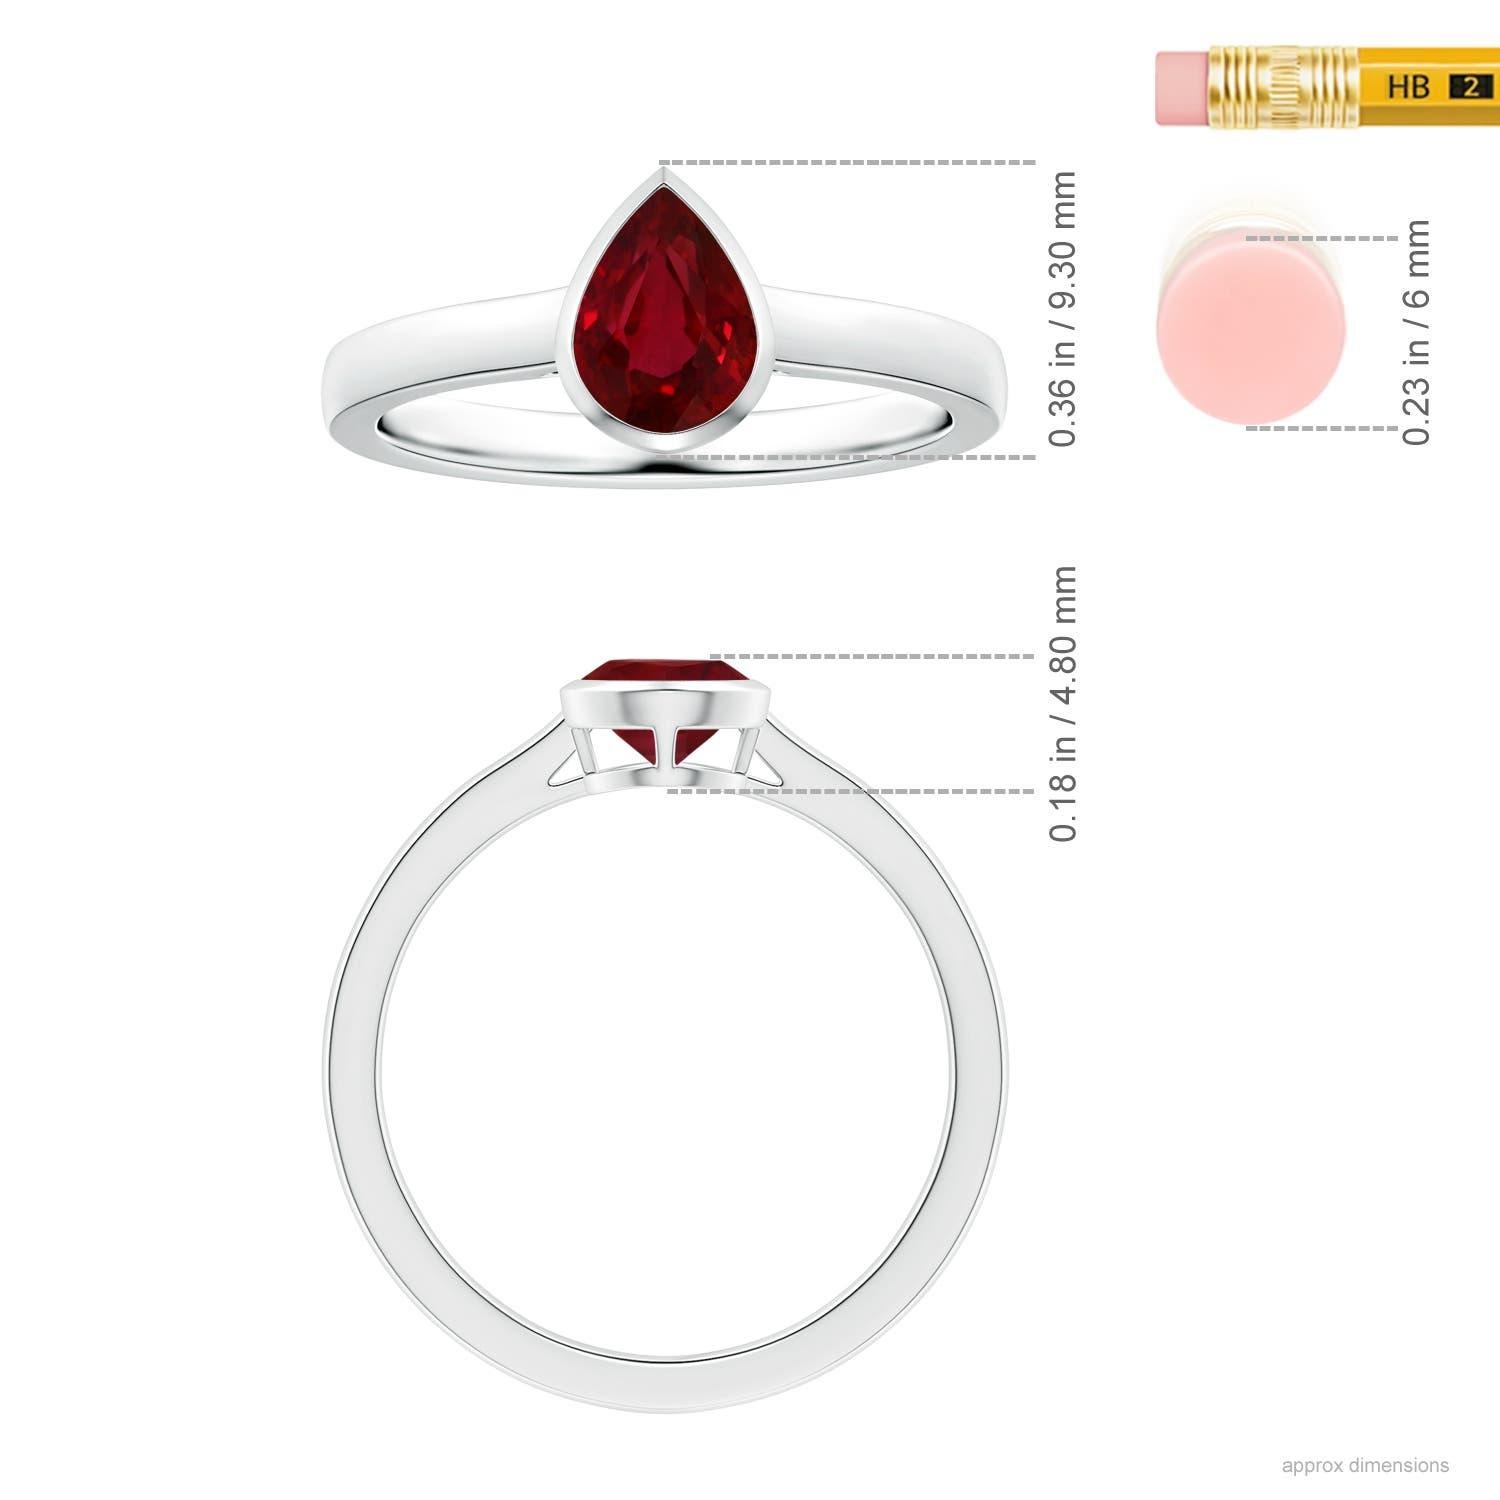 For Sale:  ANGARA Bezel-Set GIA Certified Pear-Shaped Ruby Solitaire Ring in White Gold 5